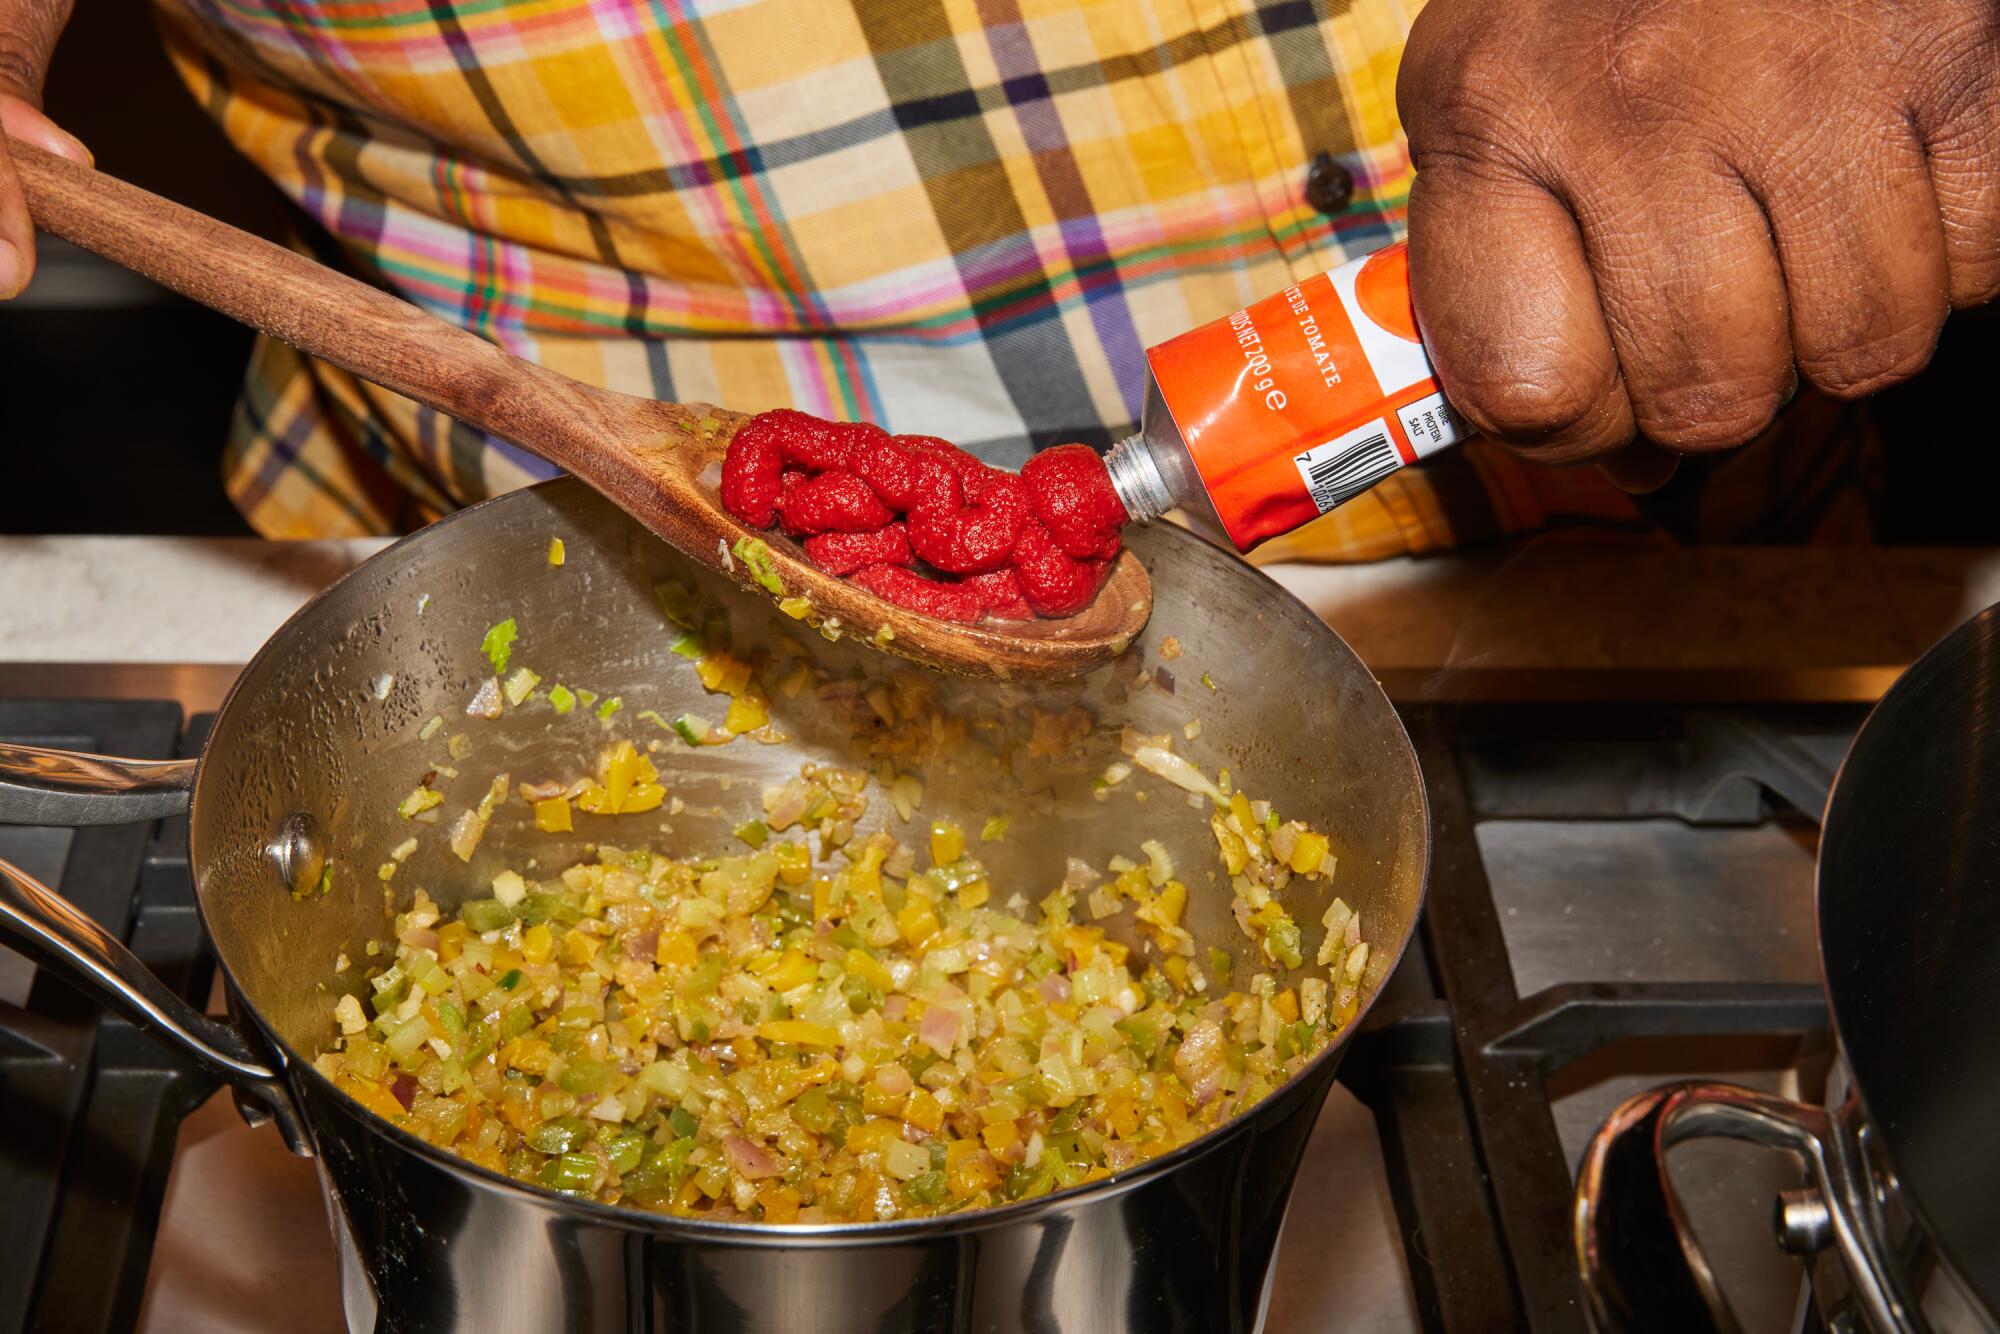 Chef Michael Twitty adds tomato paste to his gumbo.